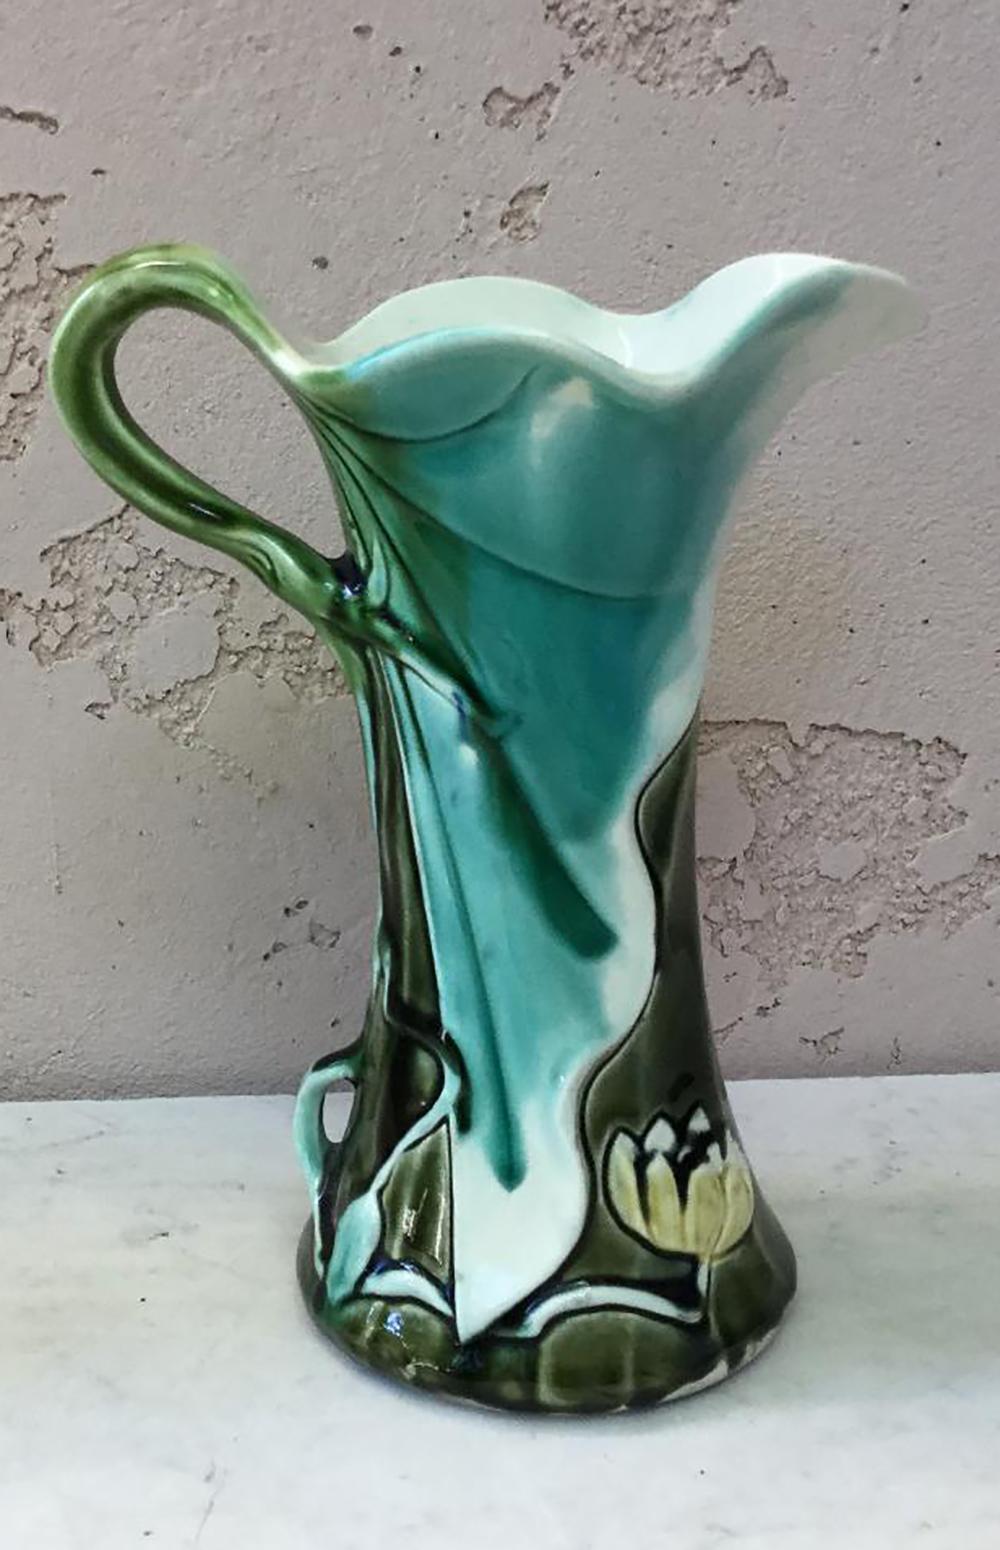 Majolica pitcher water lily leaves and flowers, circa 1900.
Art Nouveau period.
Signed fives Lille number 1491.